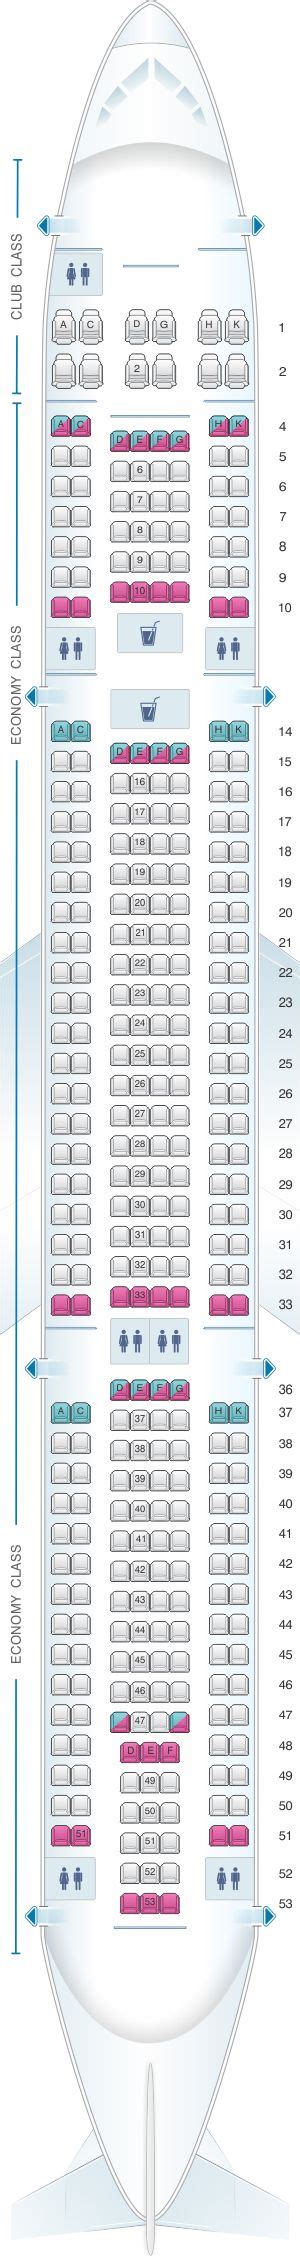 Seat Map Air Transat Airbus A330 300 346pax With Images Air Transat